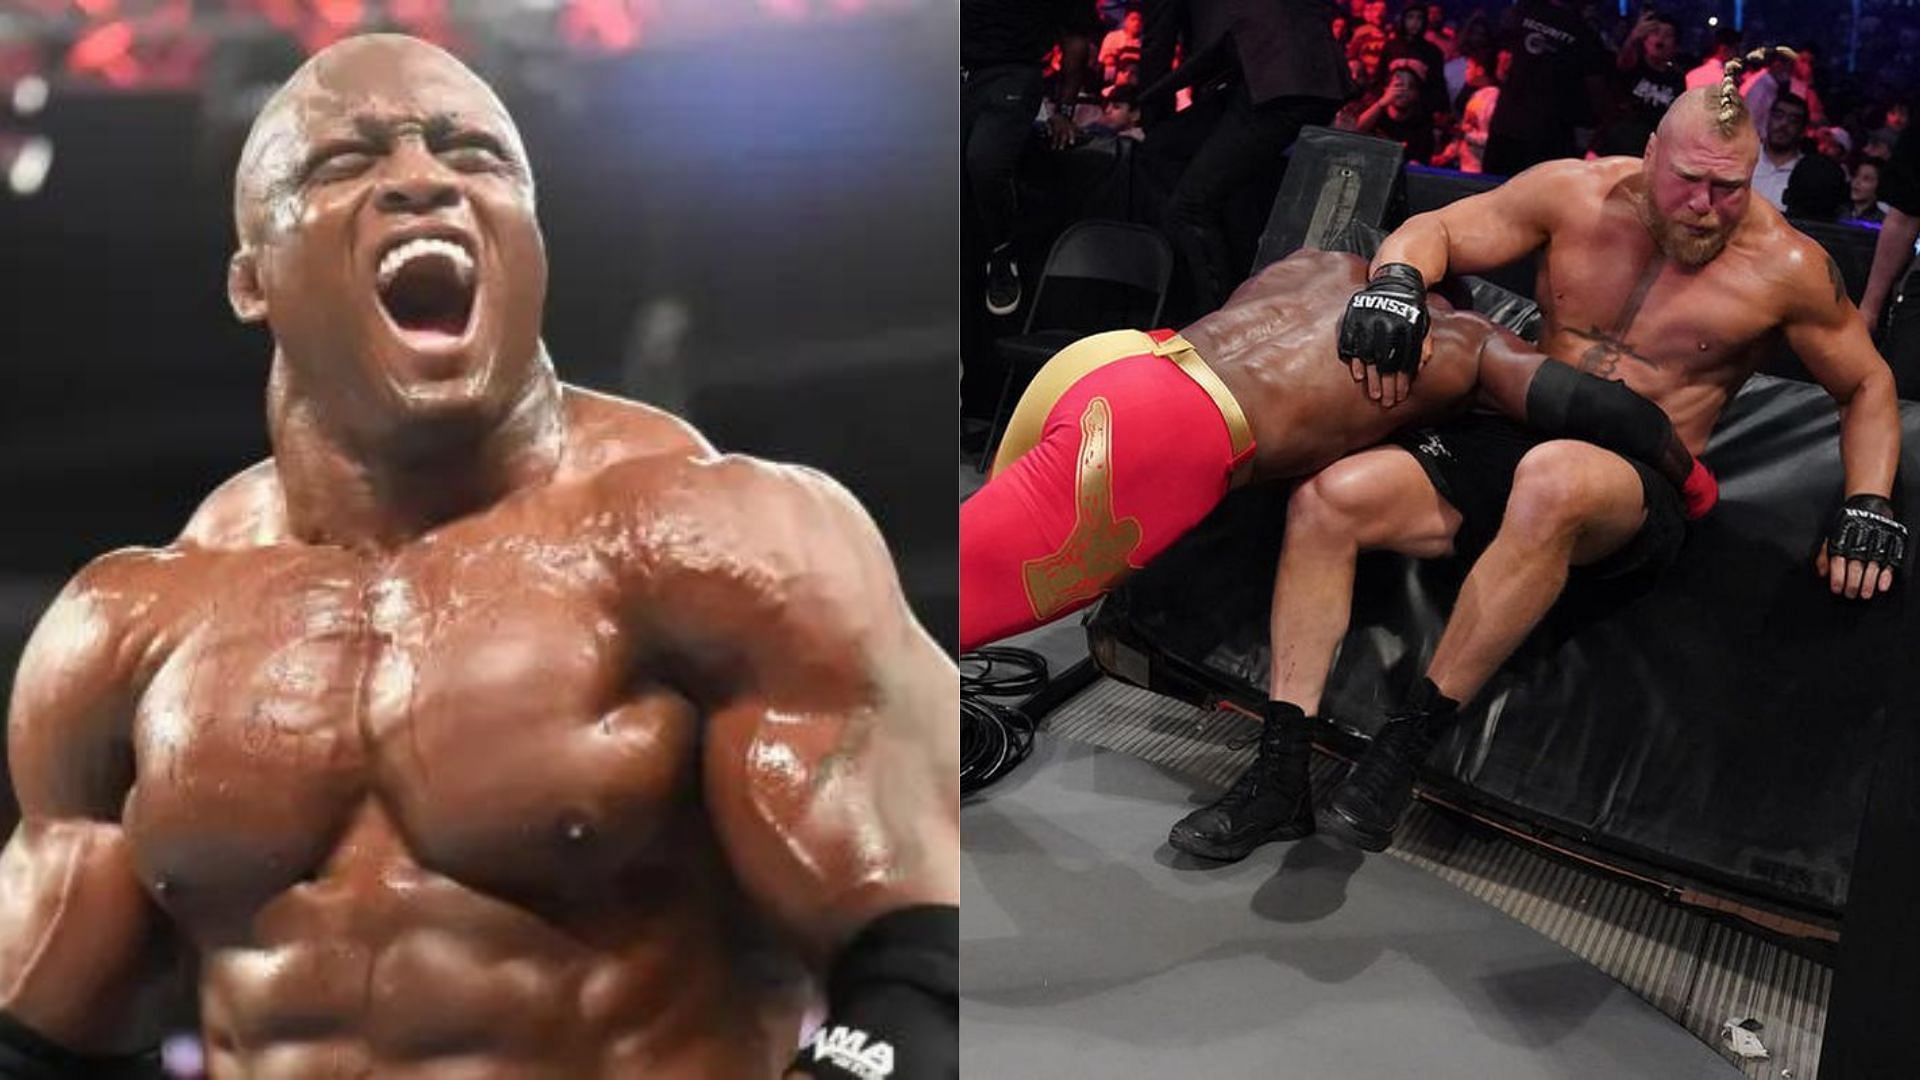 Bobby Lashley and Brock Lesnar faced each other at Crown Jewel